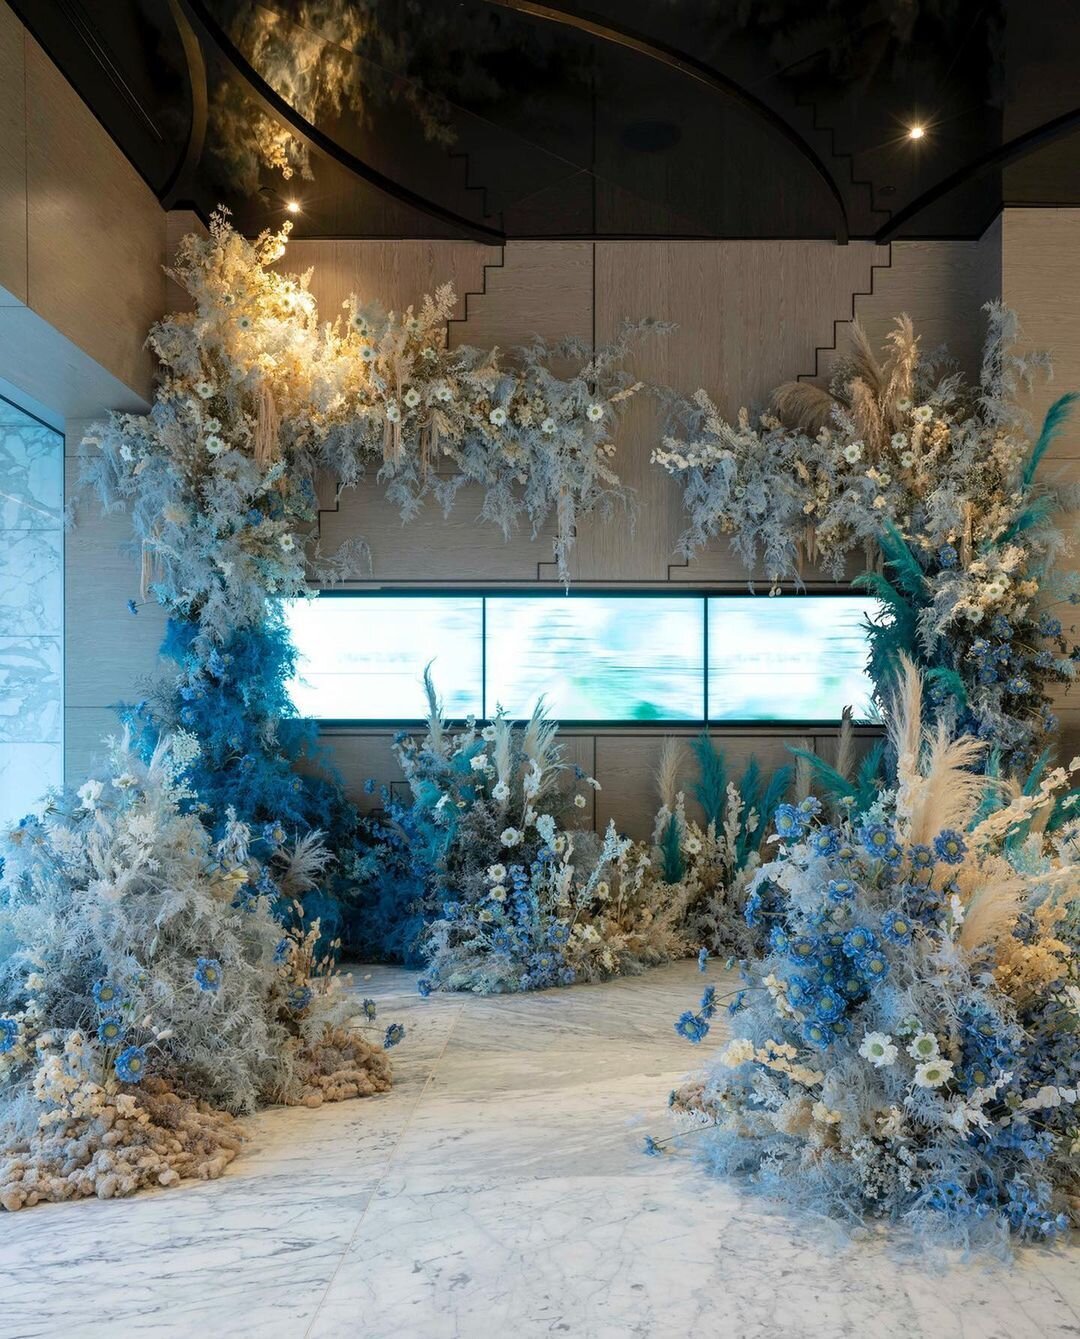 Last autumn our team had the opportunity to create this immersive floral experience for @concordpacific and their newly opened showroom in….jpeg